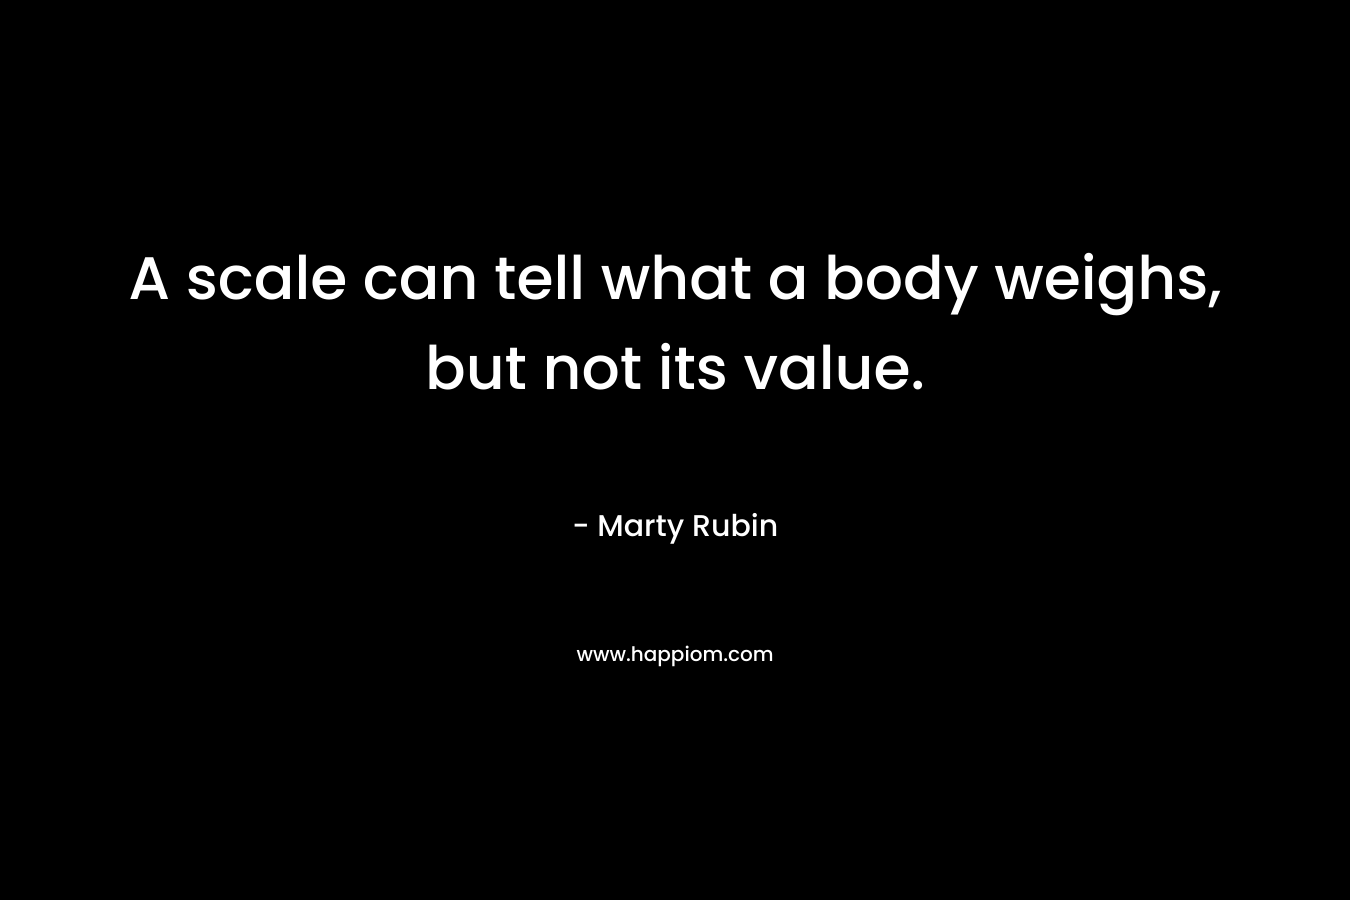 A scale can tell what a body weighs, but not its value.